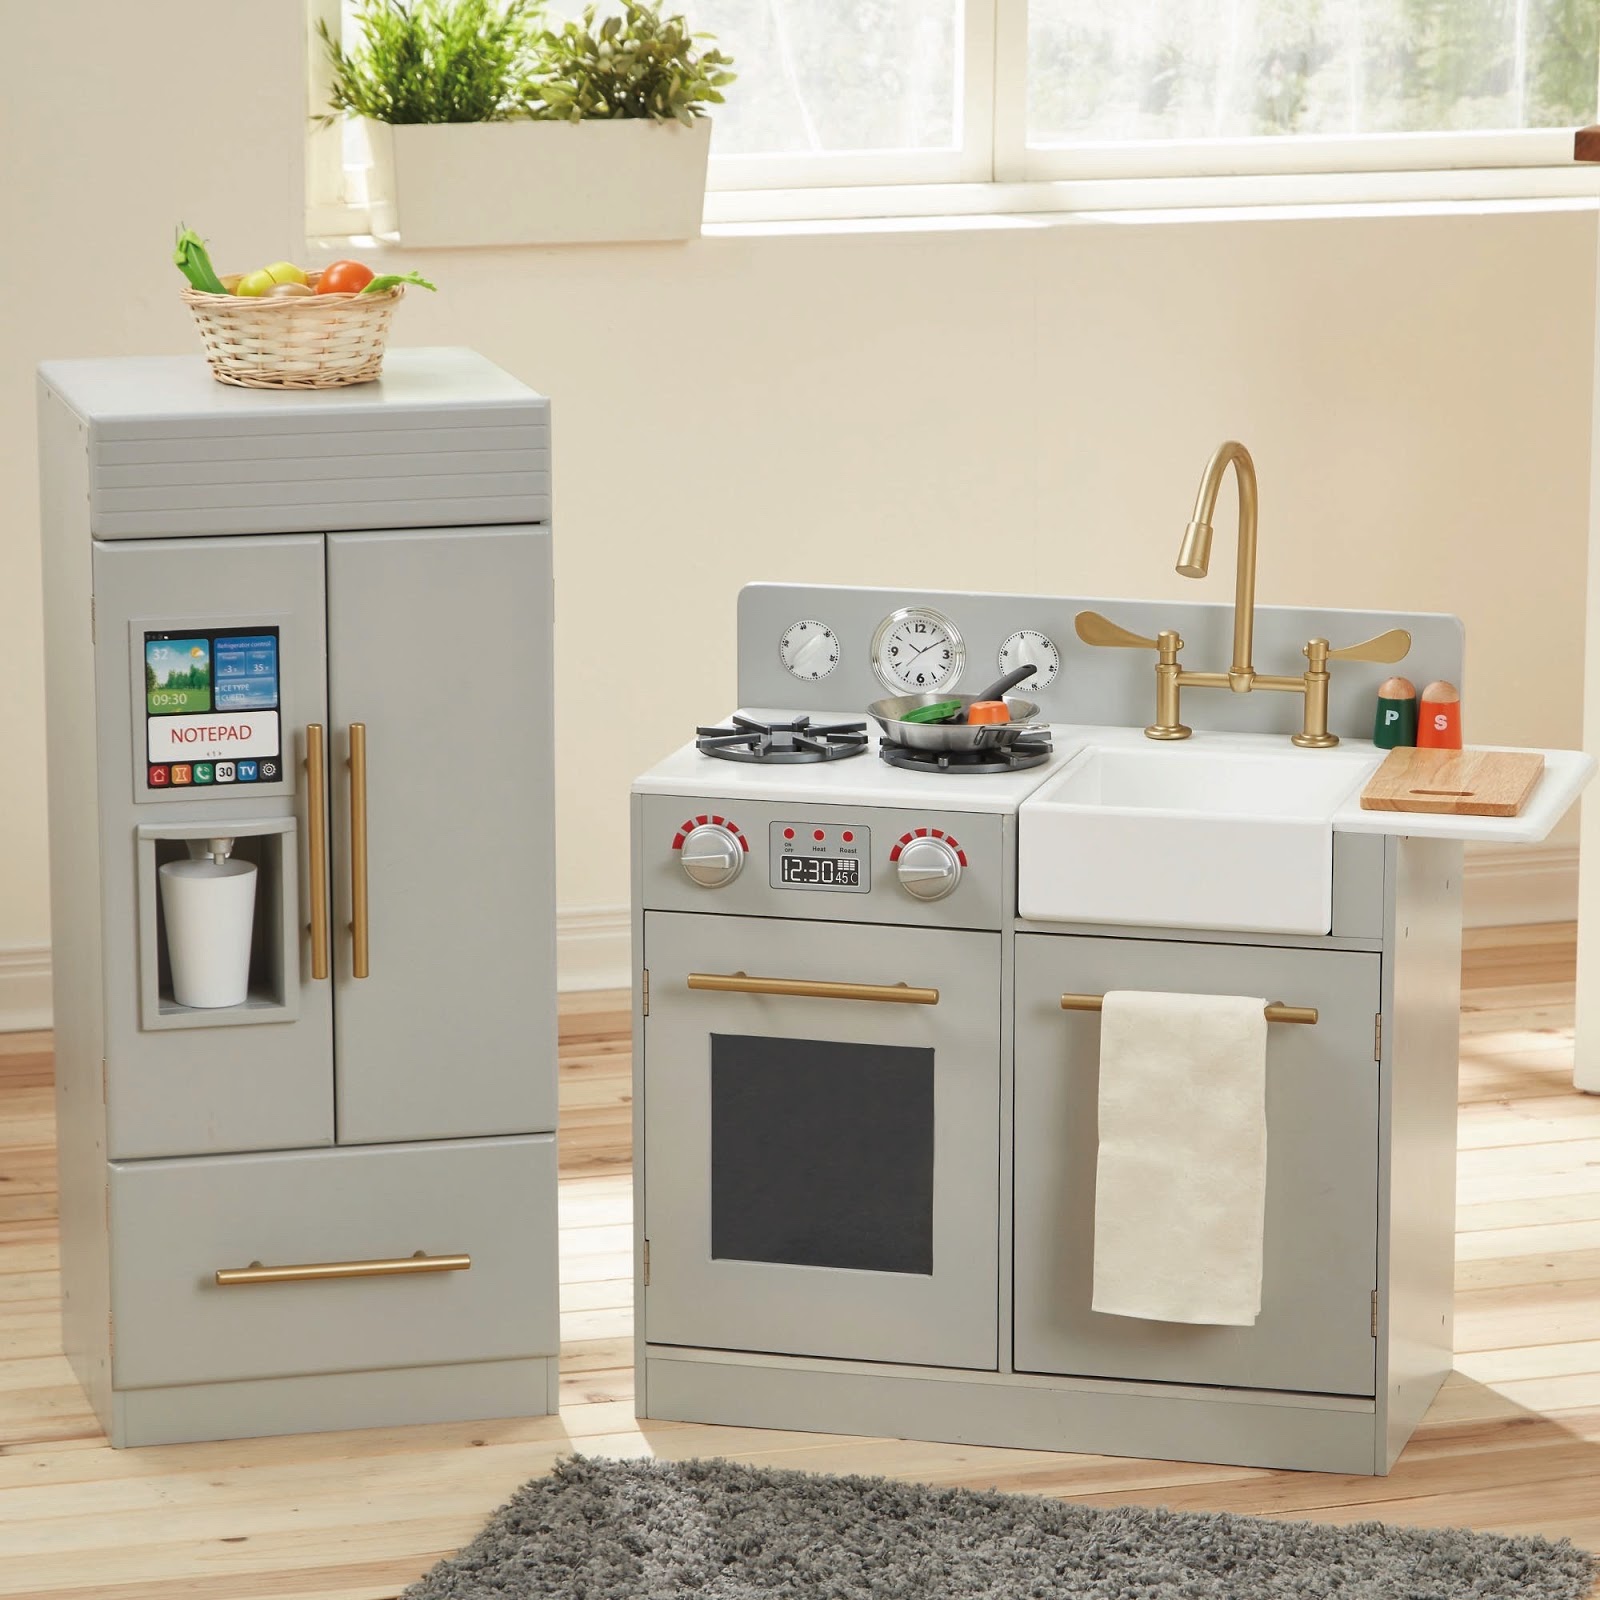 Look for Less Modern  Grey Toy Kitchen  Pretty Real